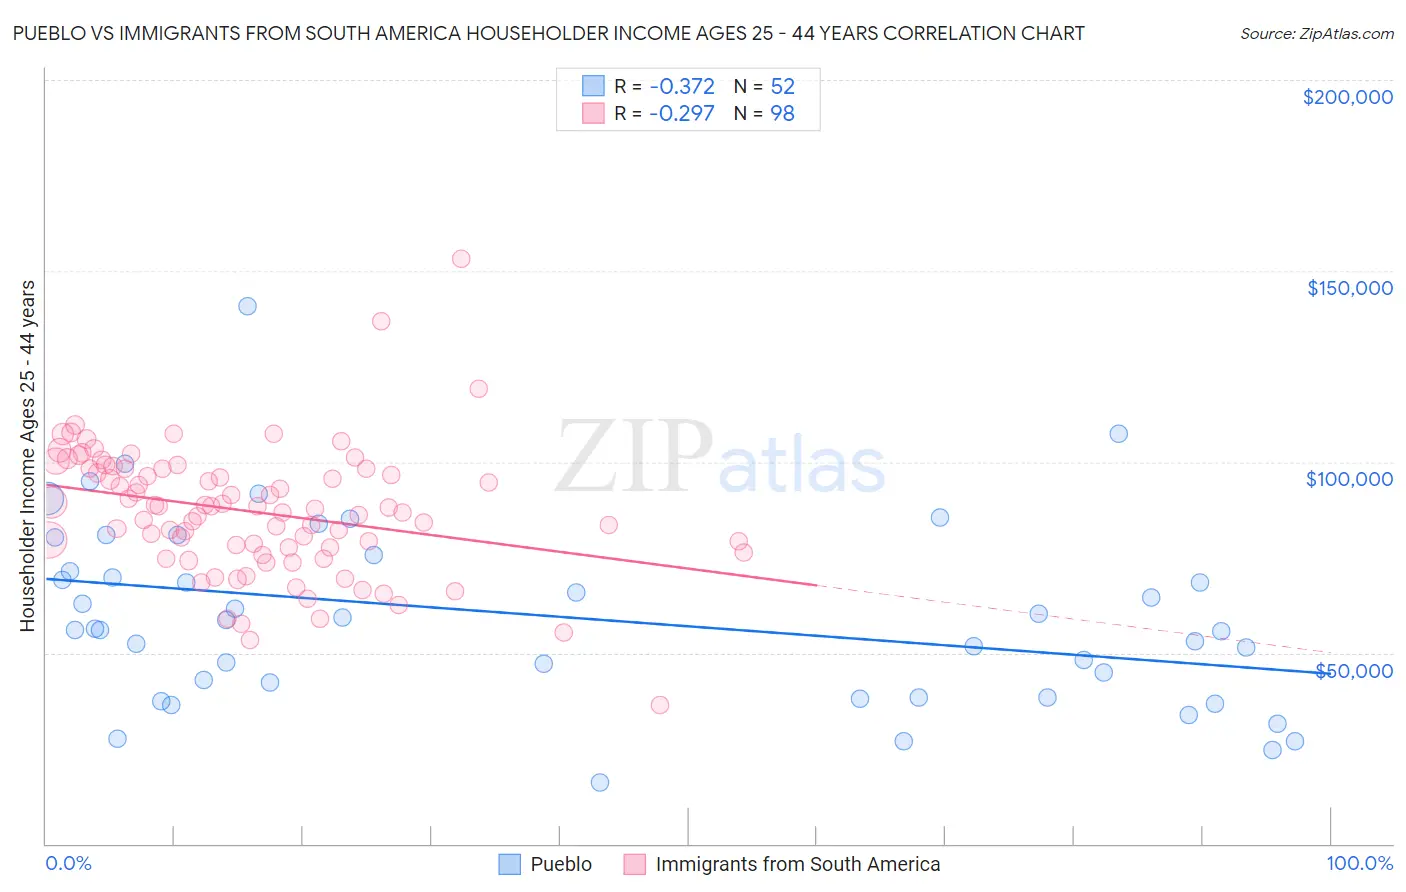 Pueblo vs Immigrants from South America Householder Income Ages 25 - 44 years